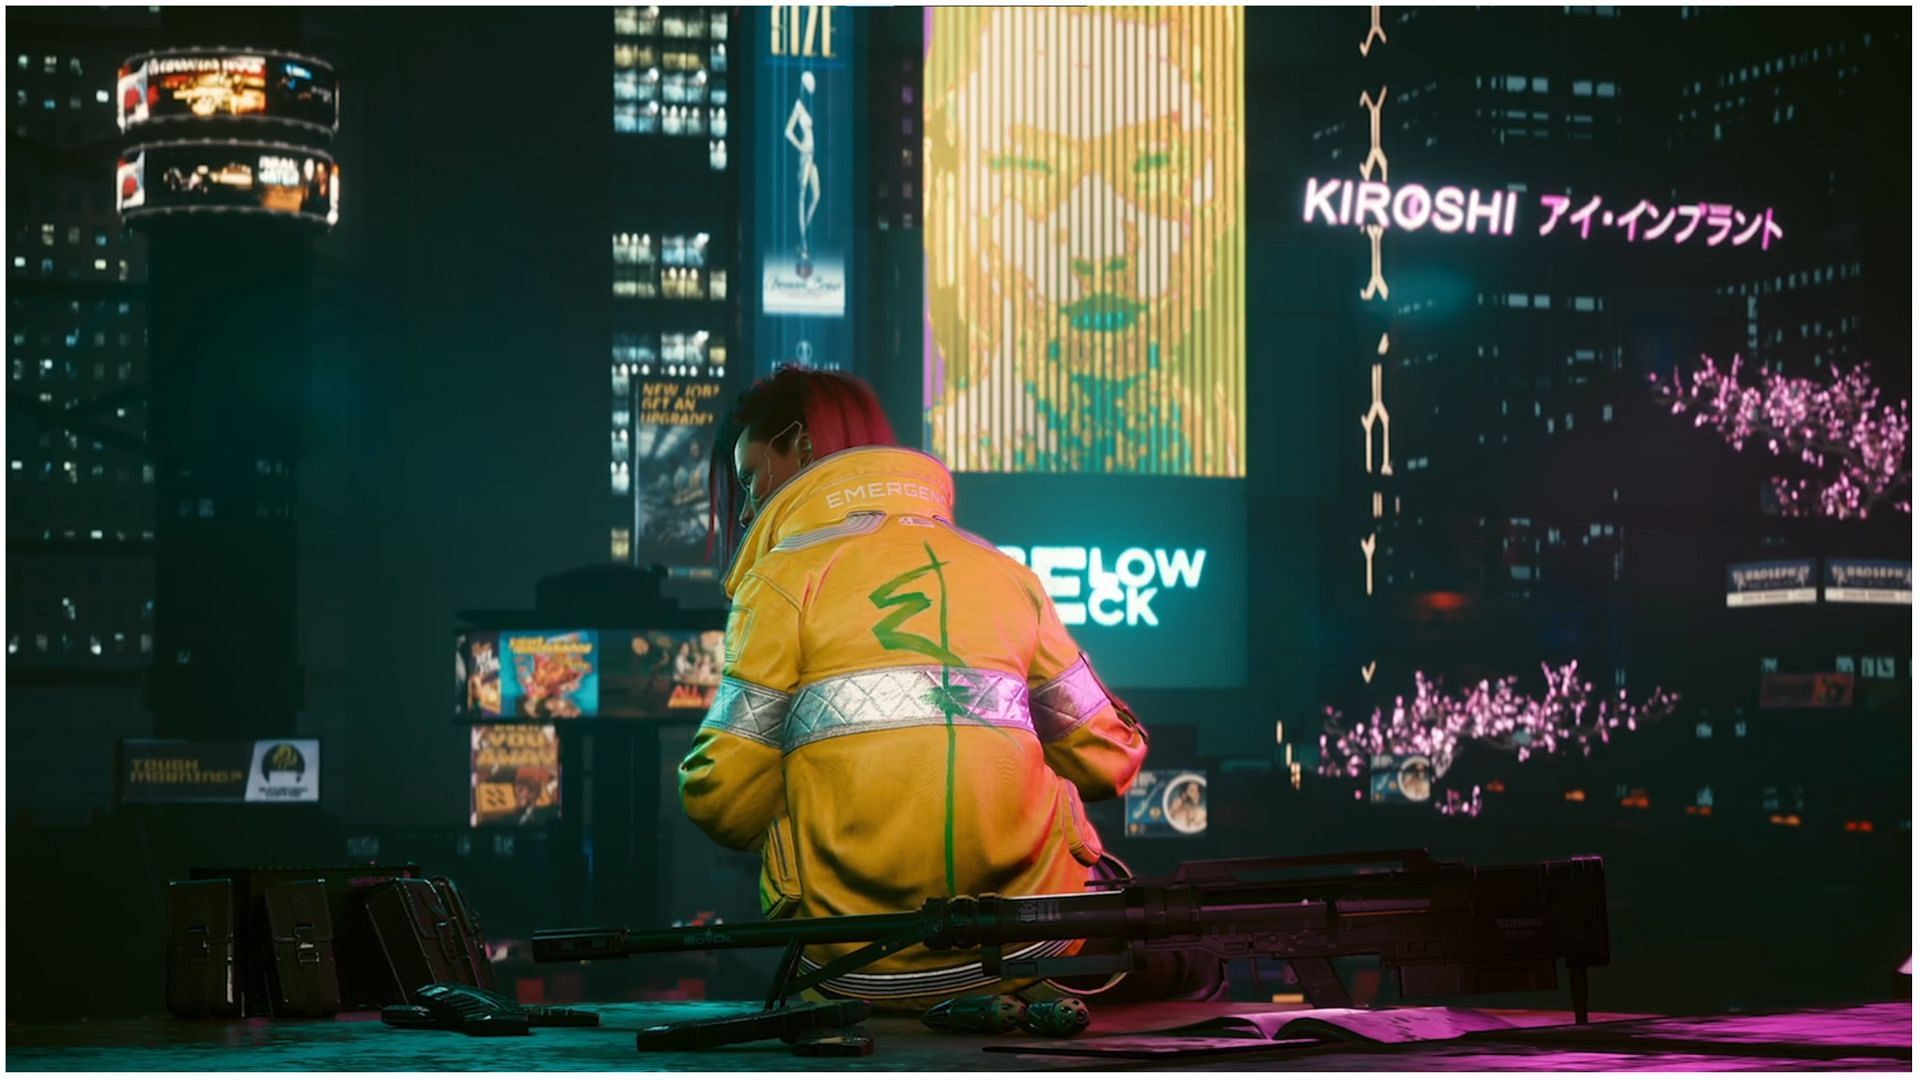 Cyberpunk 2077 Adds a Key Part of the Edgerunners Anime With Its